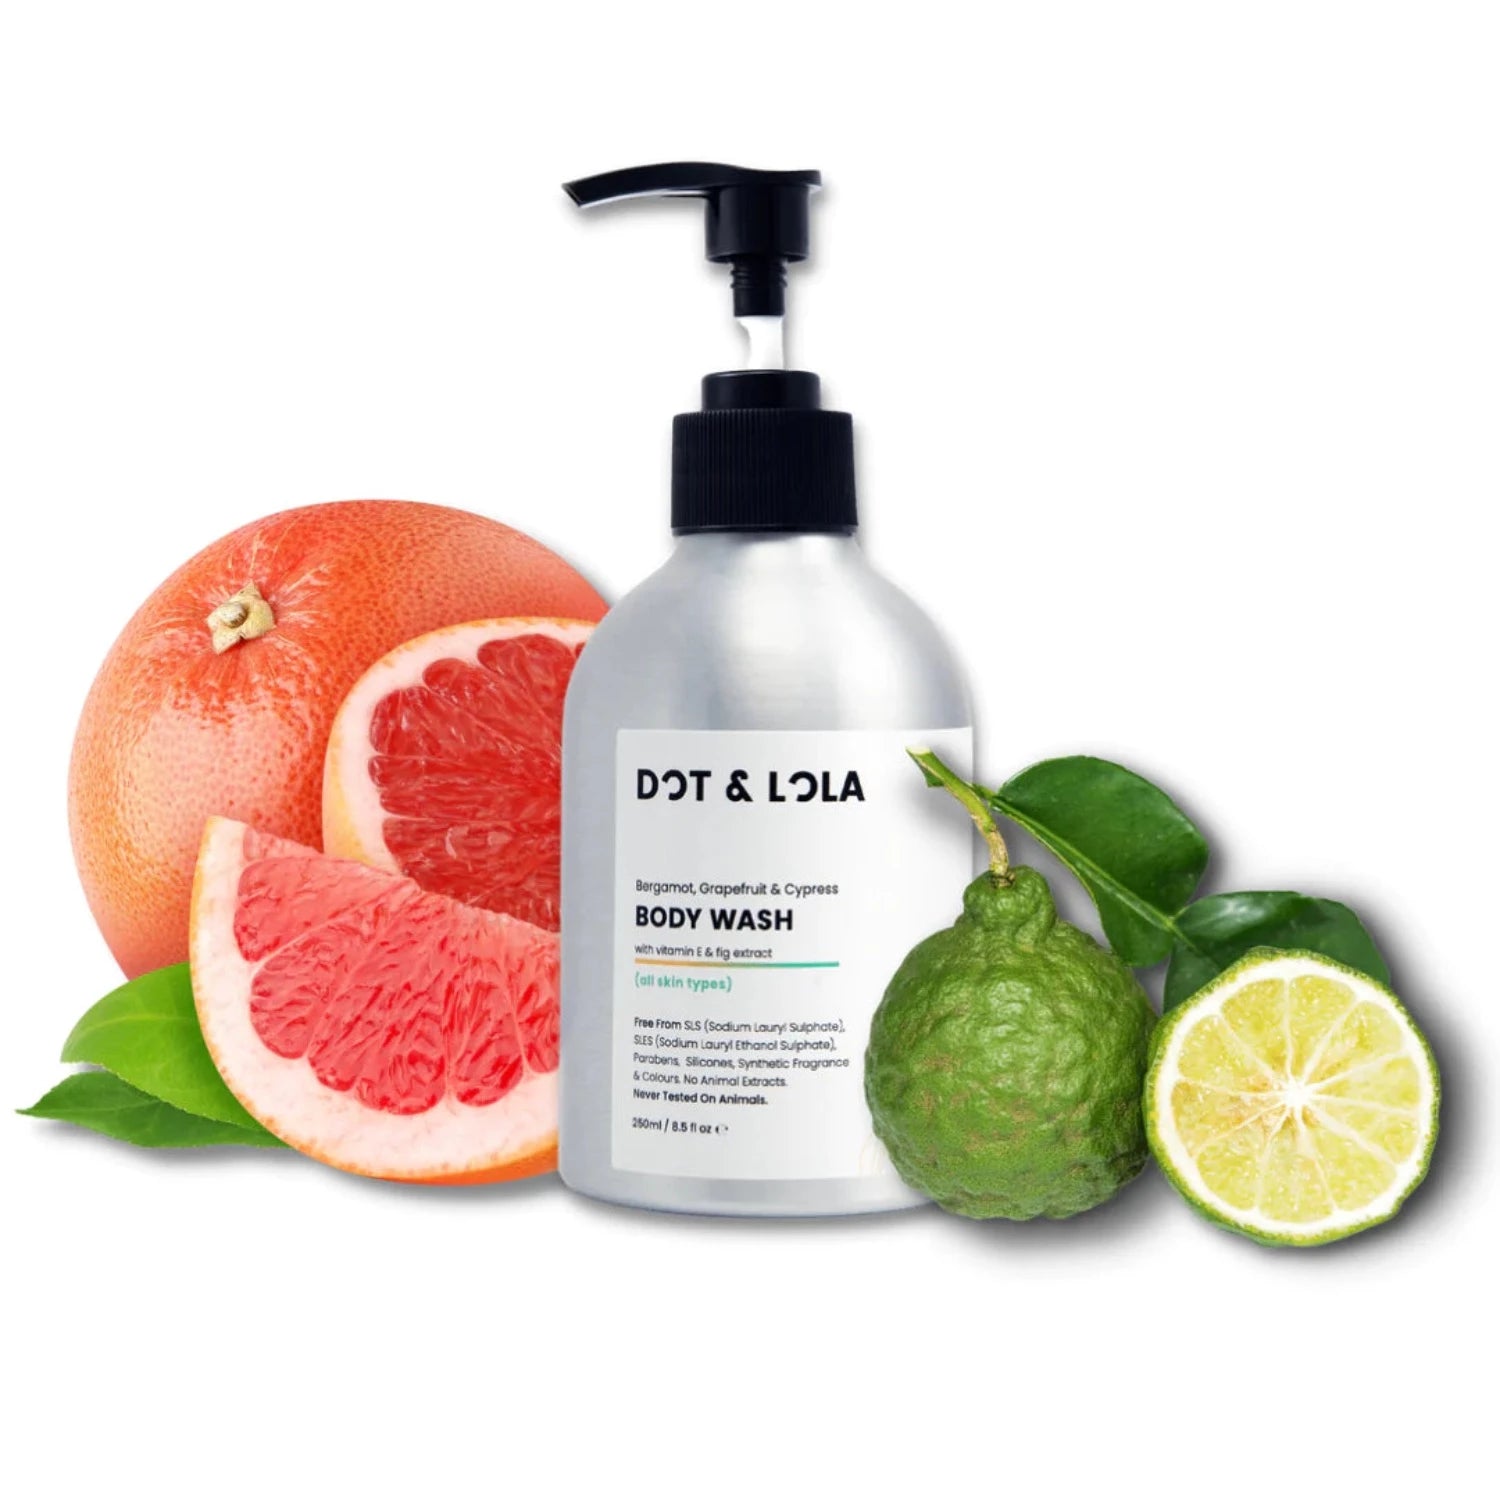 DOT & LOLA Body Wash With Bergamot, Grapefruit & Cypress, protect skin from UV damage, while a stimulating cypress scent invigorates the senses and uplifts the mood.